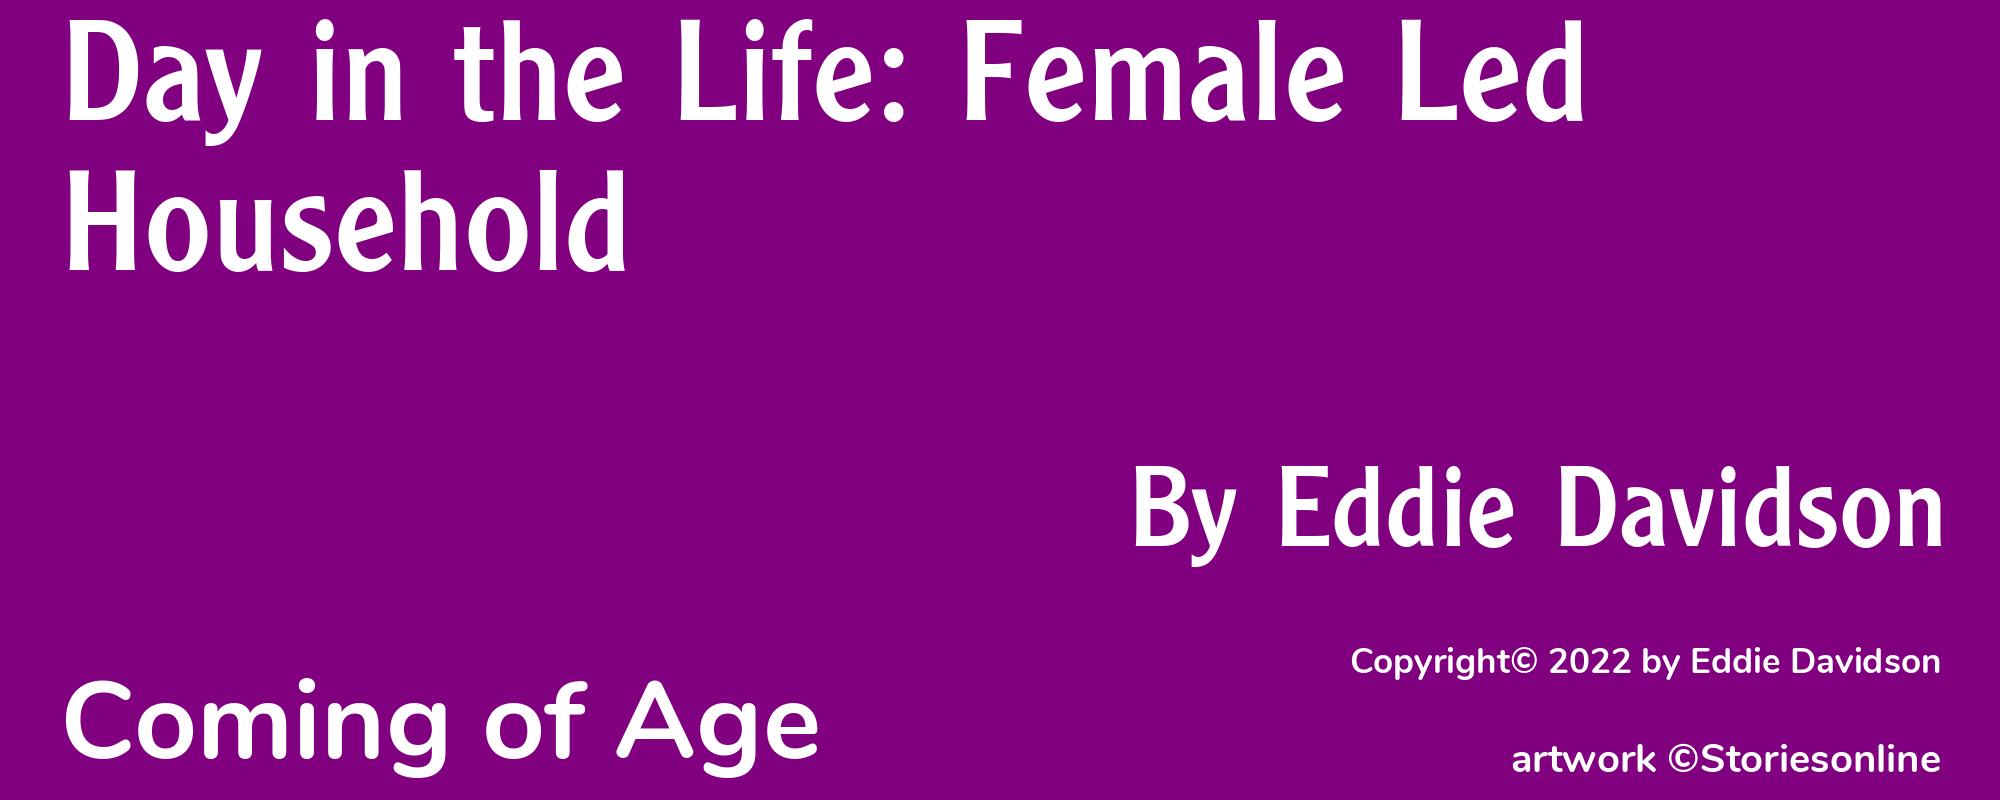 Day in the Life: Female Led Household - Cover